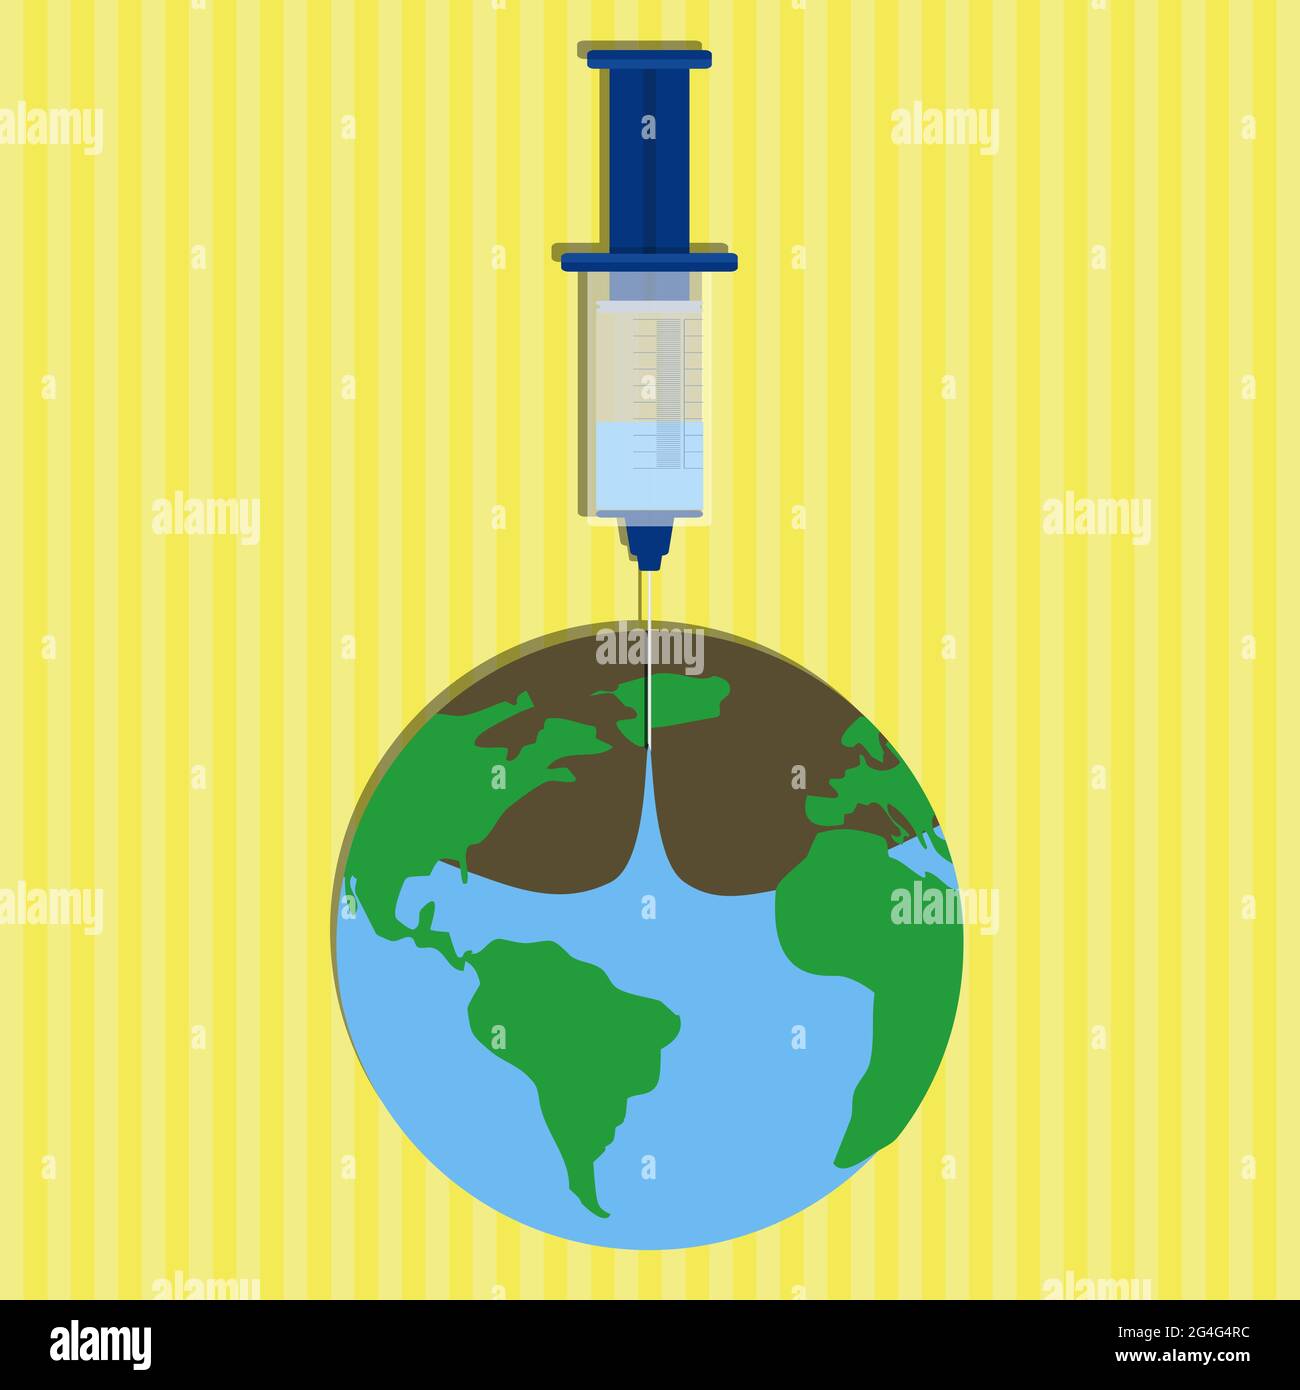 Syringe sucking all the water from the earth. Conceptual illustration on waste water and misuse of natural resources. Stock Vector